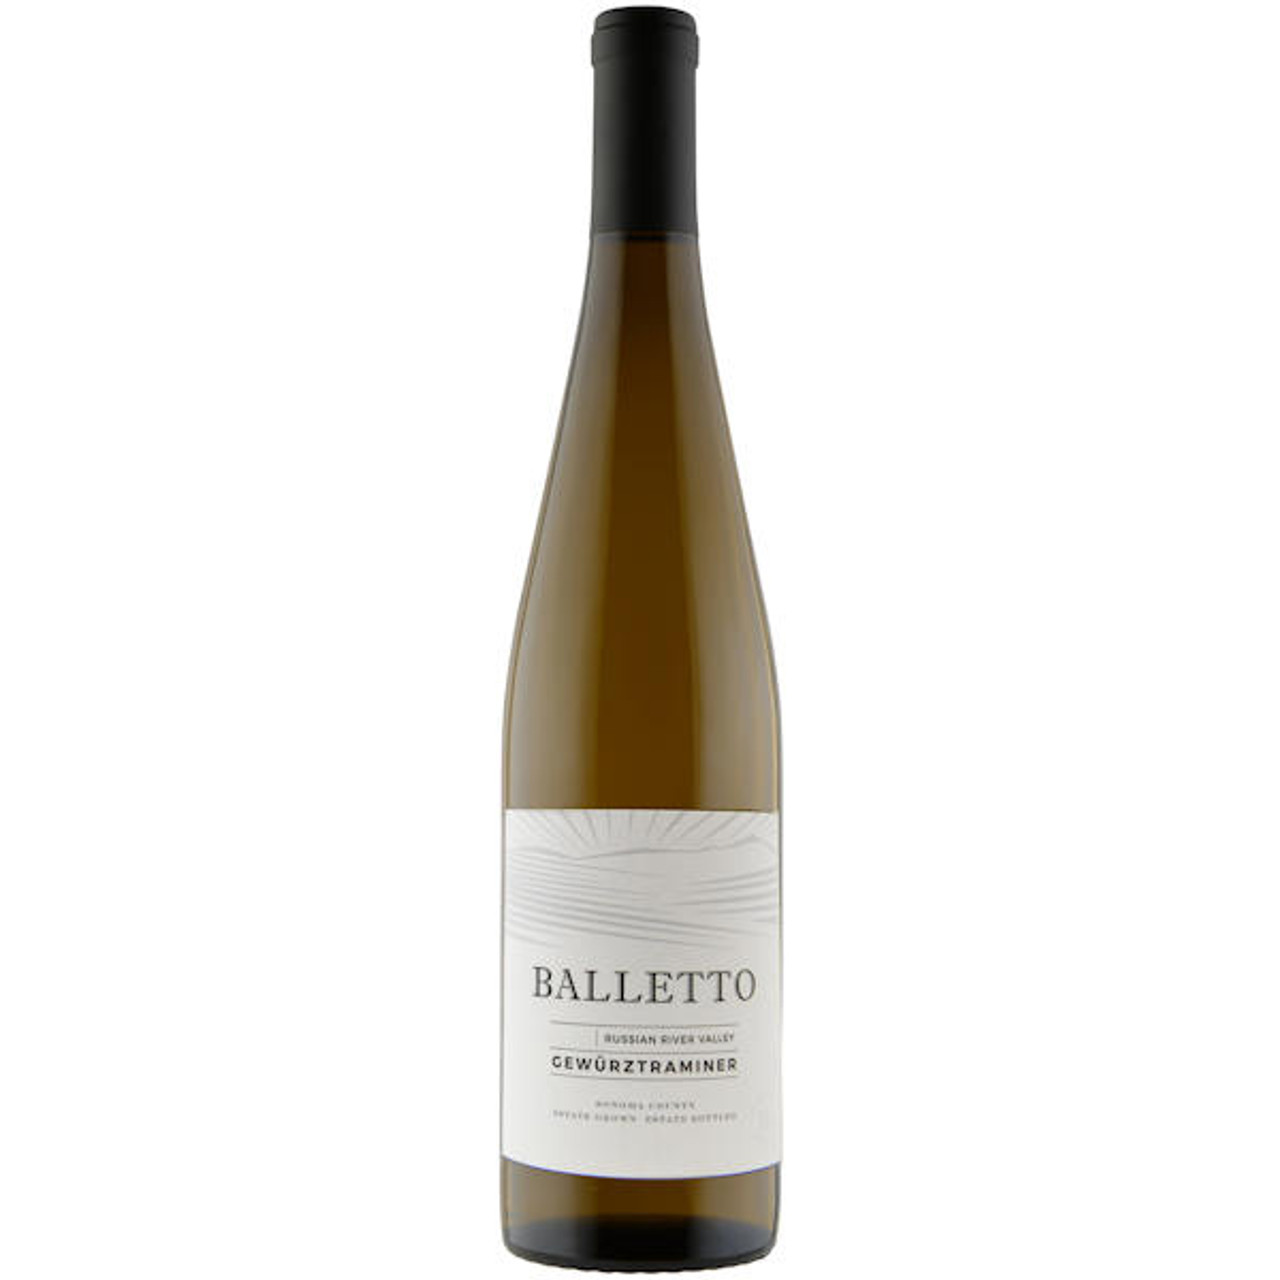 Bottle of Balletto Vineyards Gewürztraminer from search results